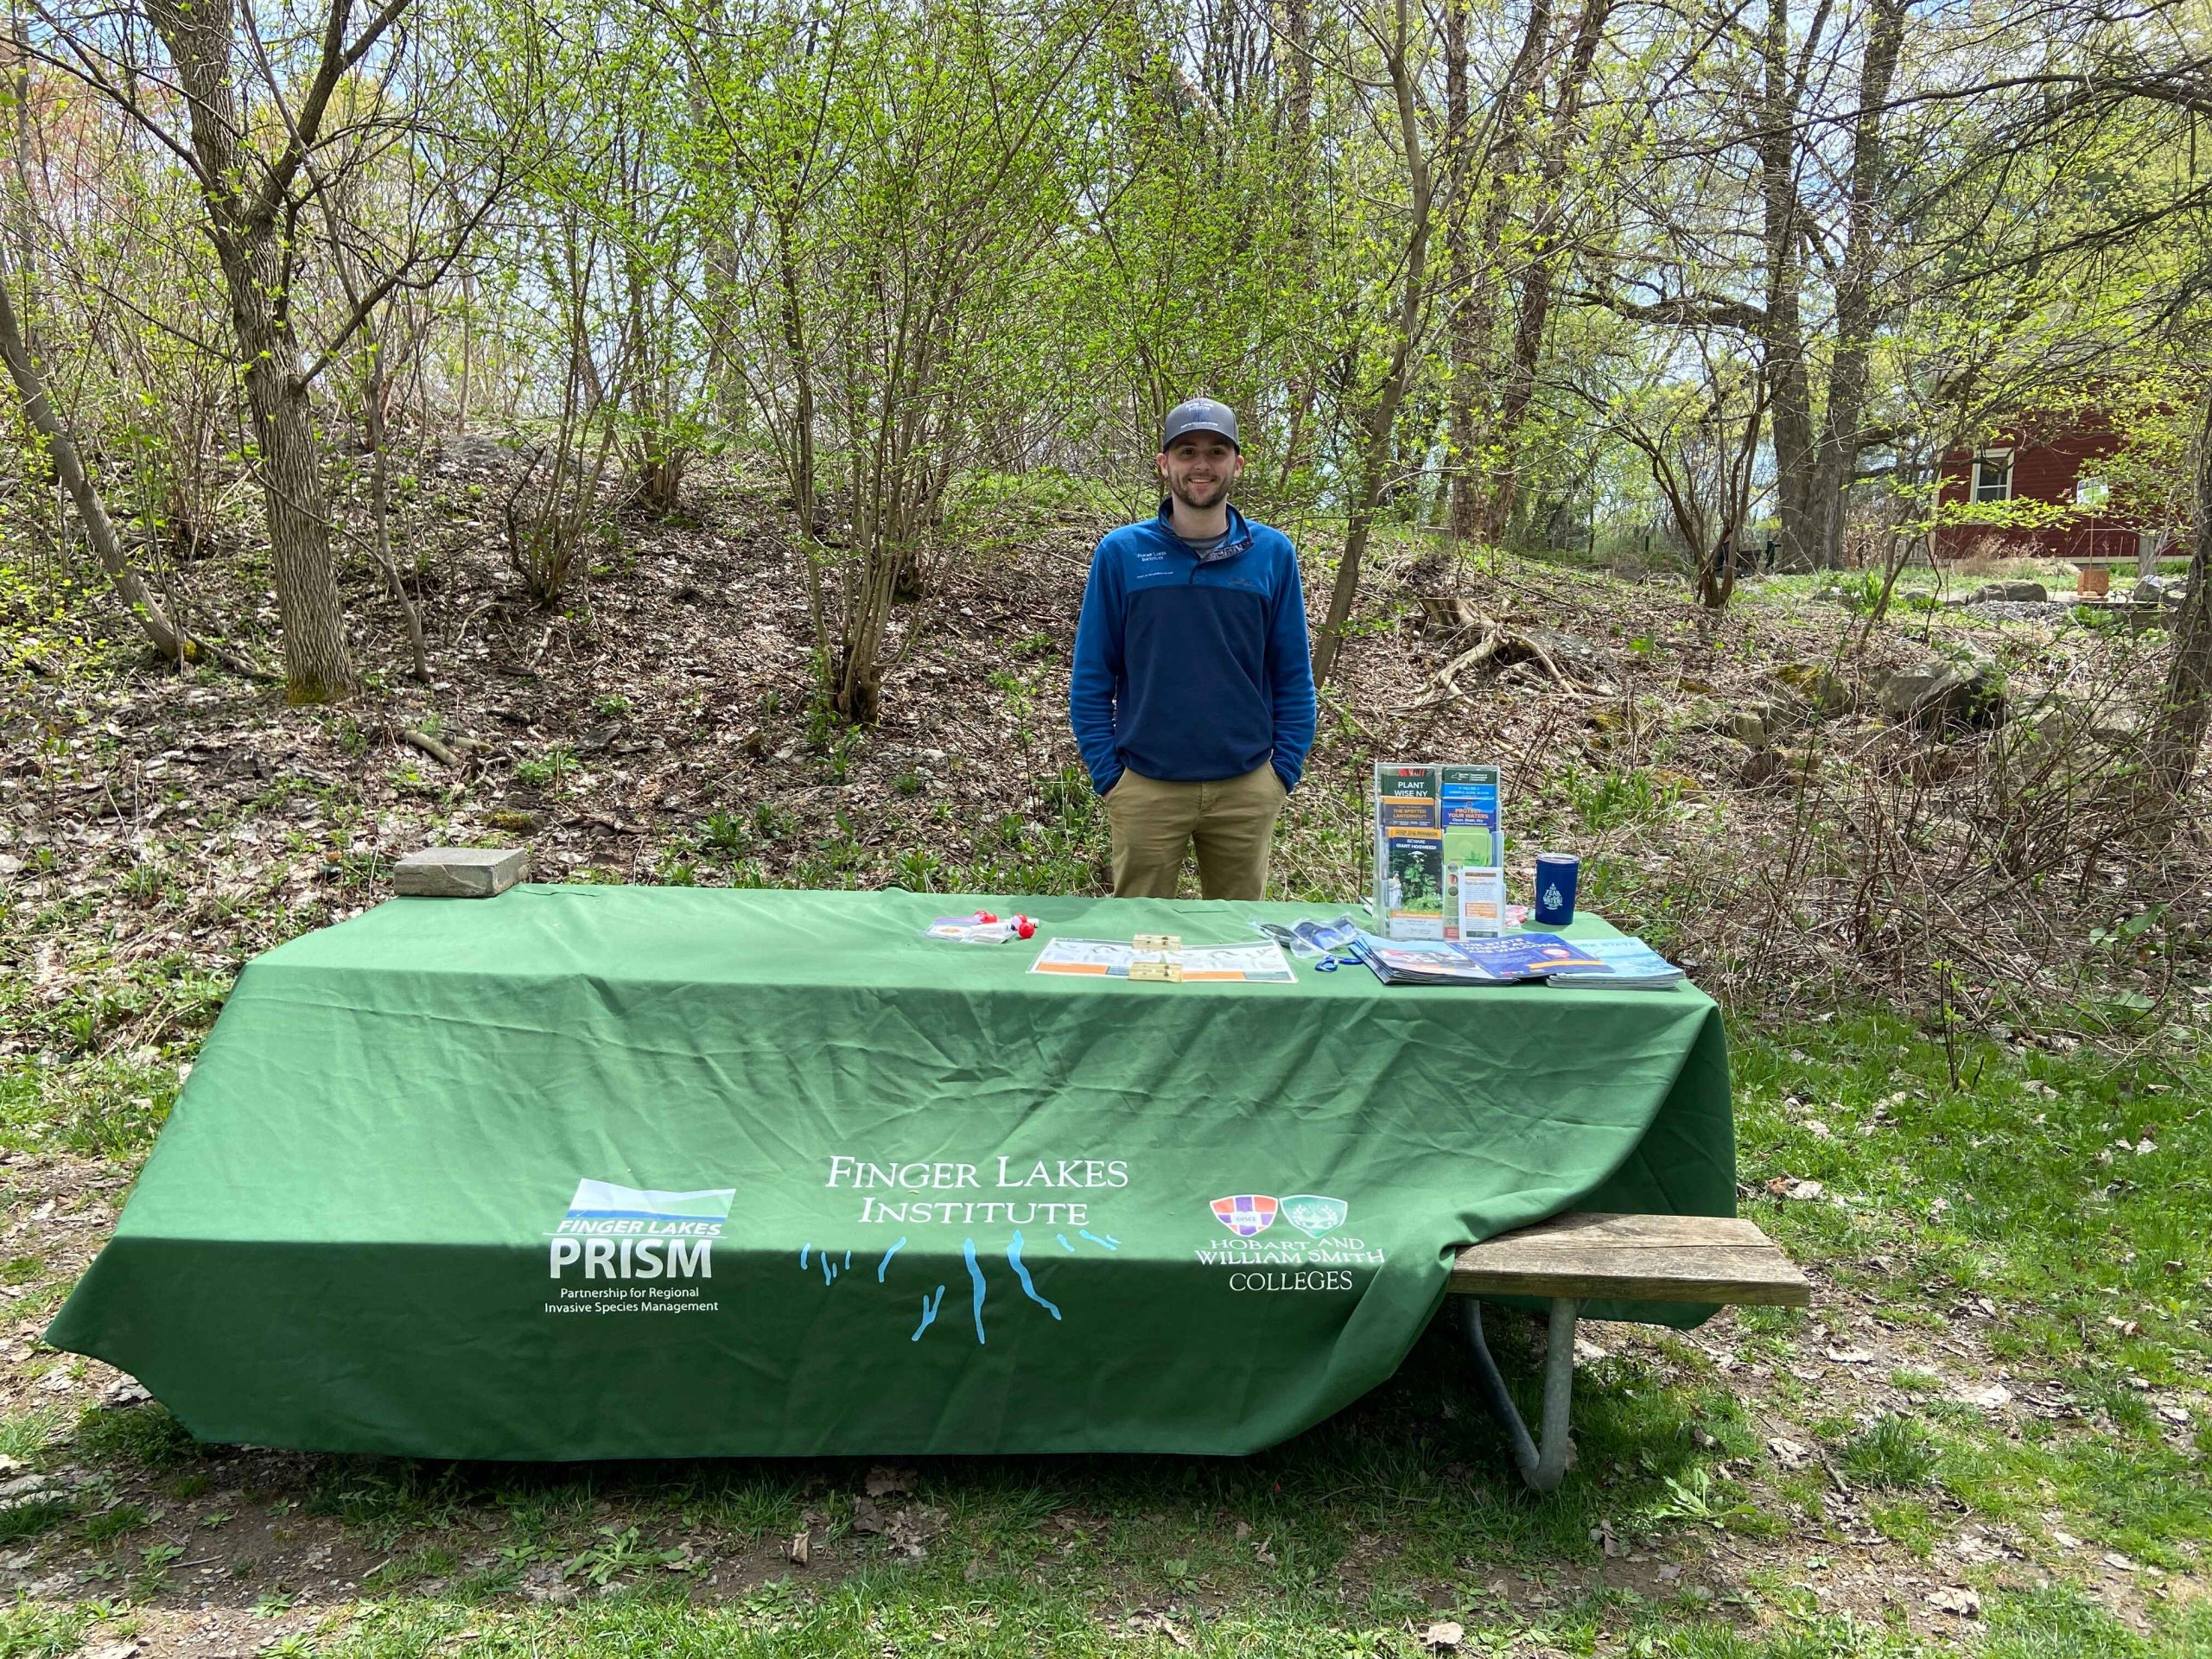 Vendor table at the 2023 Earth Day Celebration at Baltimore Woods.